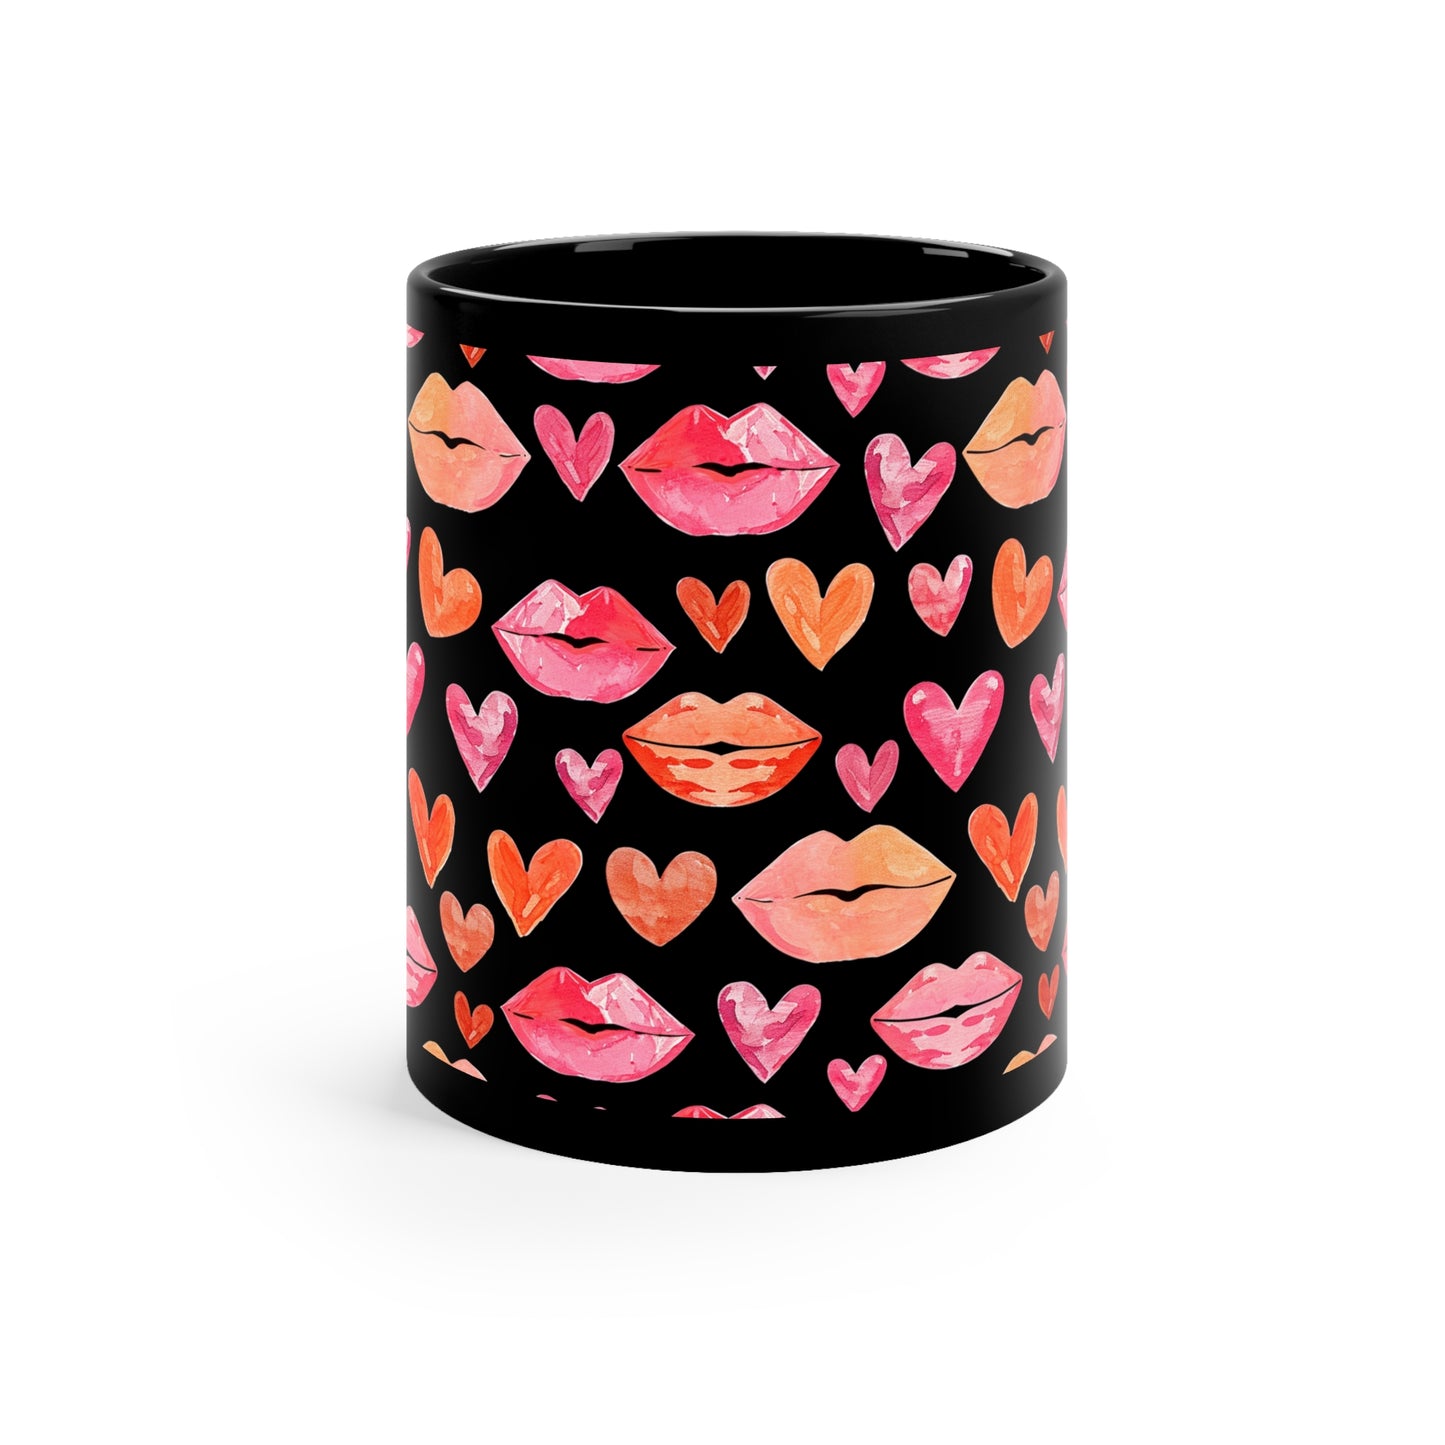 Red Hearts Kisses Coffee Mug, Art Valentine Day Lips Love Black Ceramic Cup Tea Hot Lover Unique Microwave Safe Novelty Cool Gift